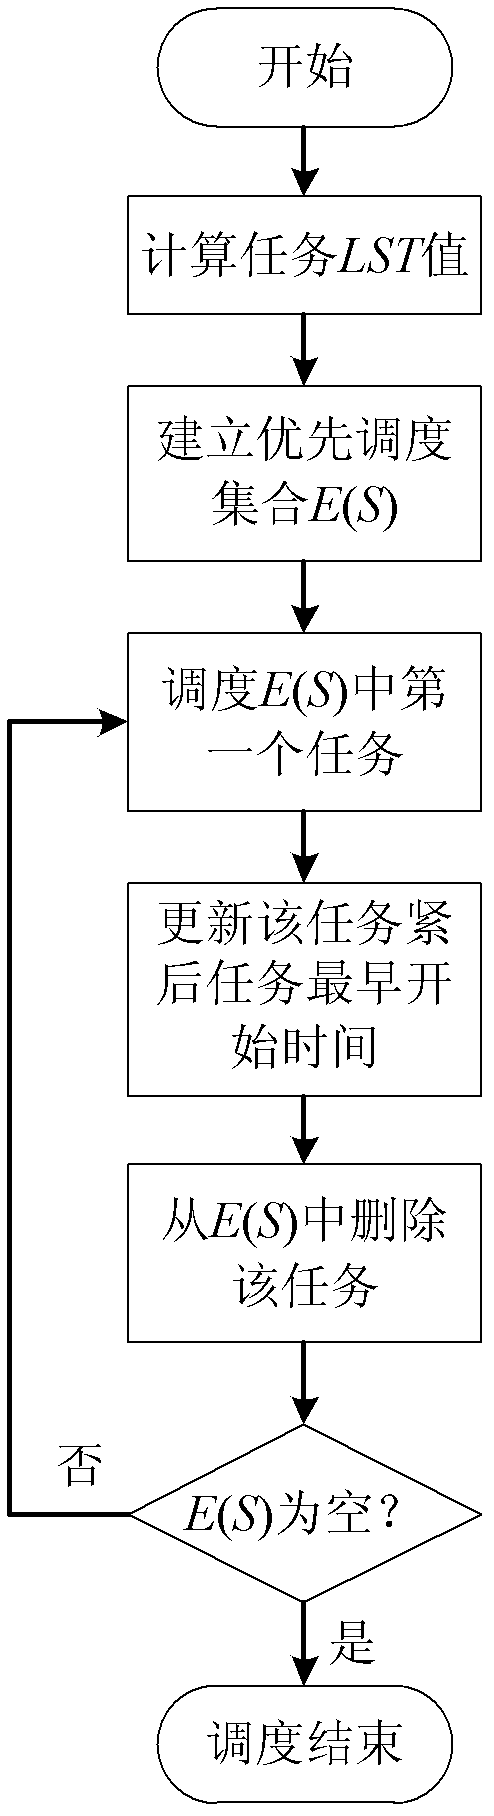 Buffer adjustment method for key chain based on project property